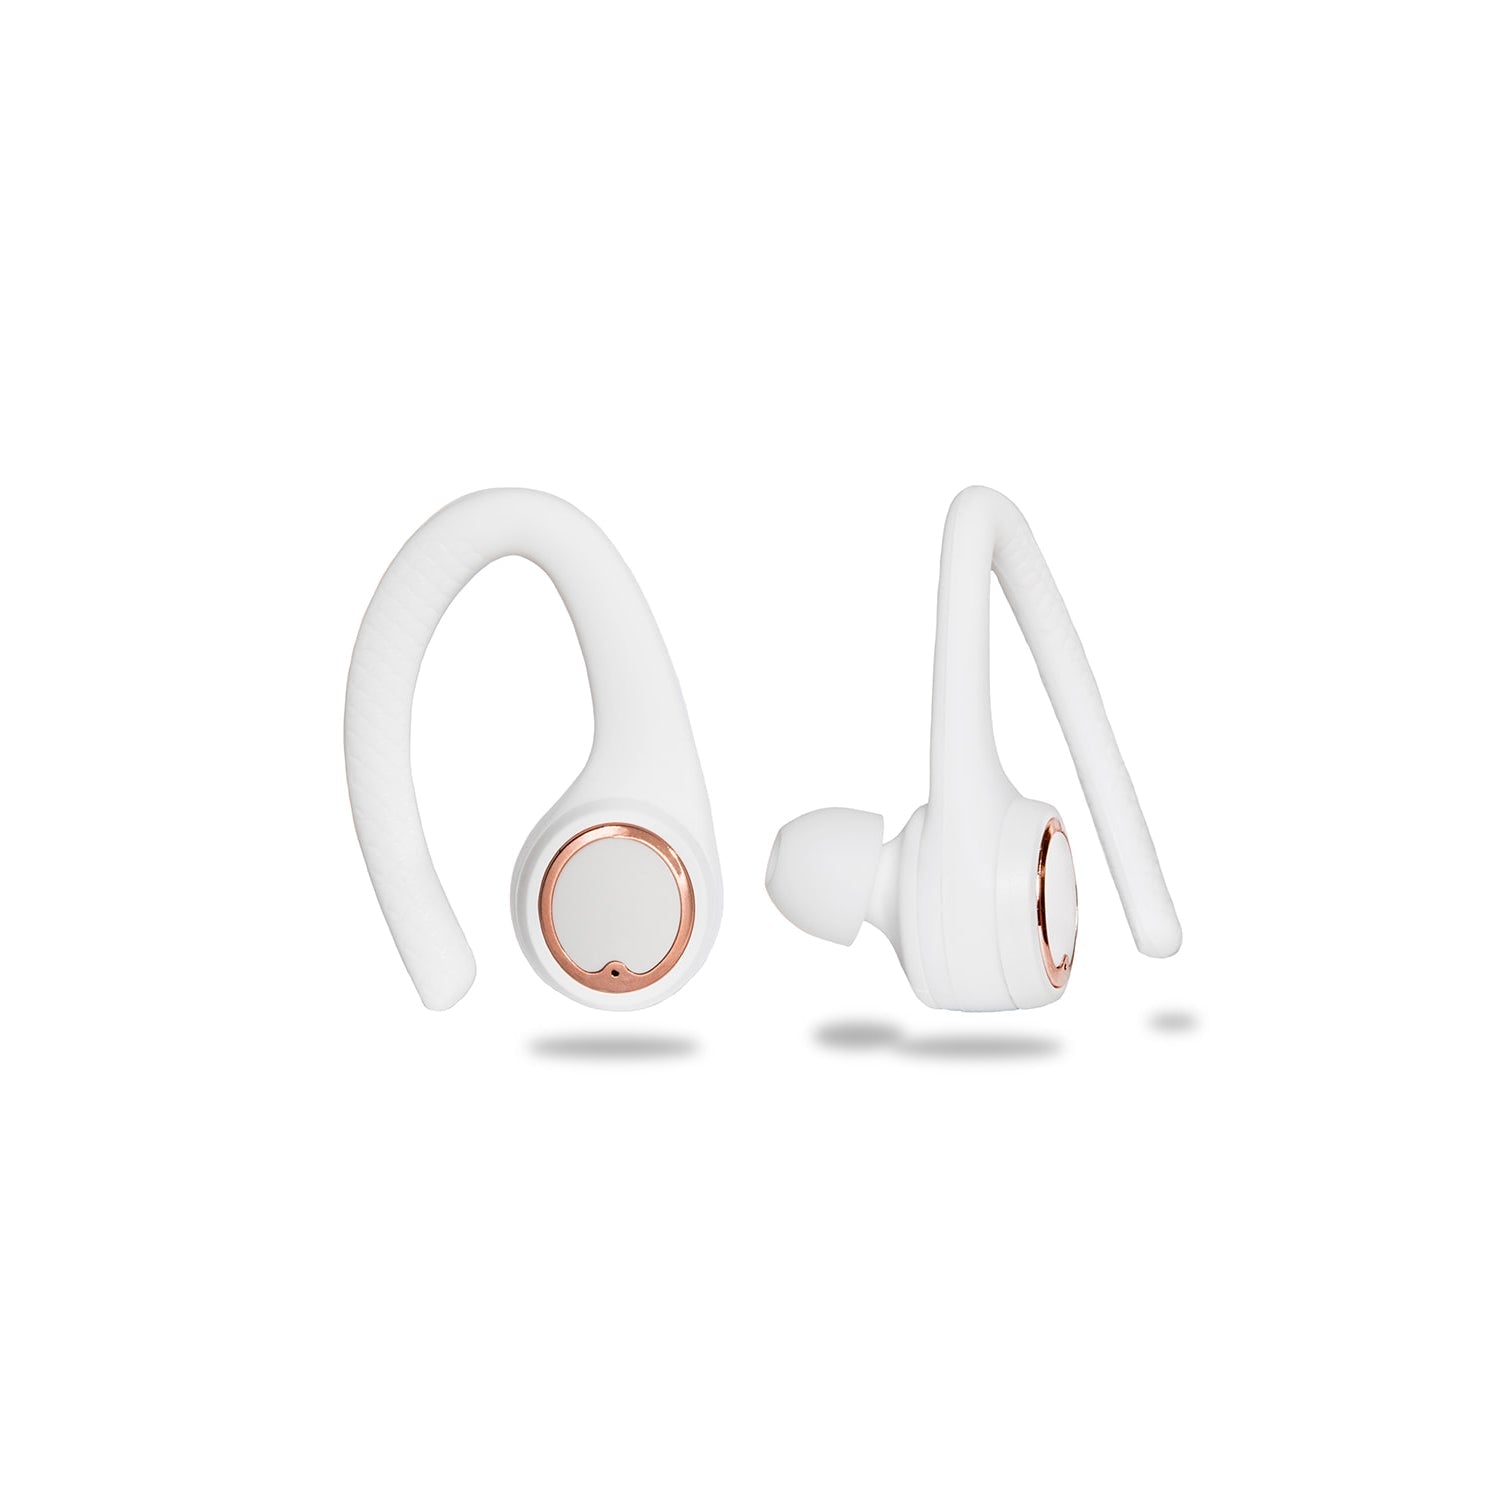 AIR Active 2.0 Rose Gold Sport Earbuds (In Ear Wireless Headphones)